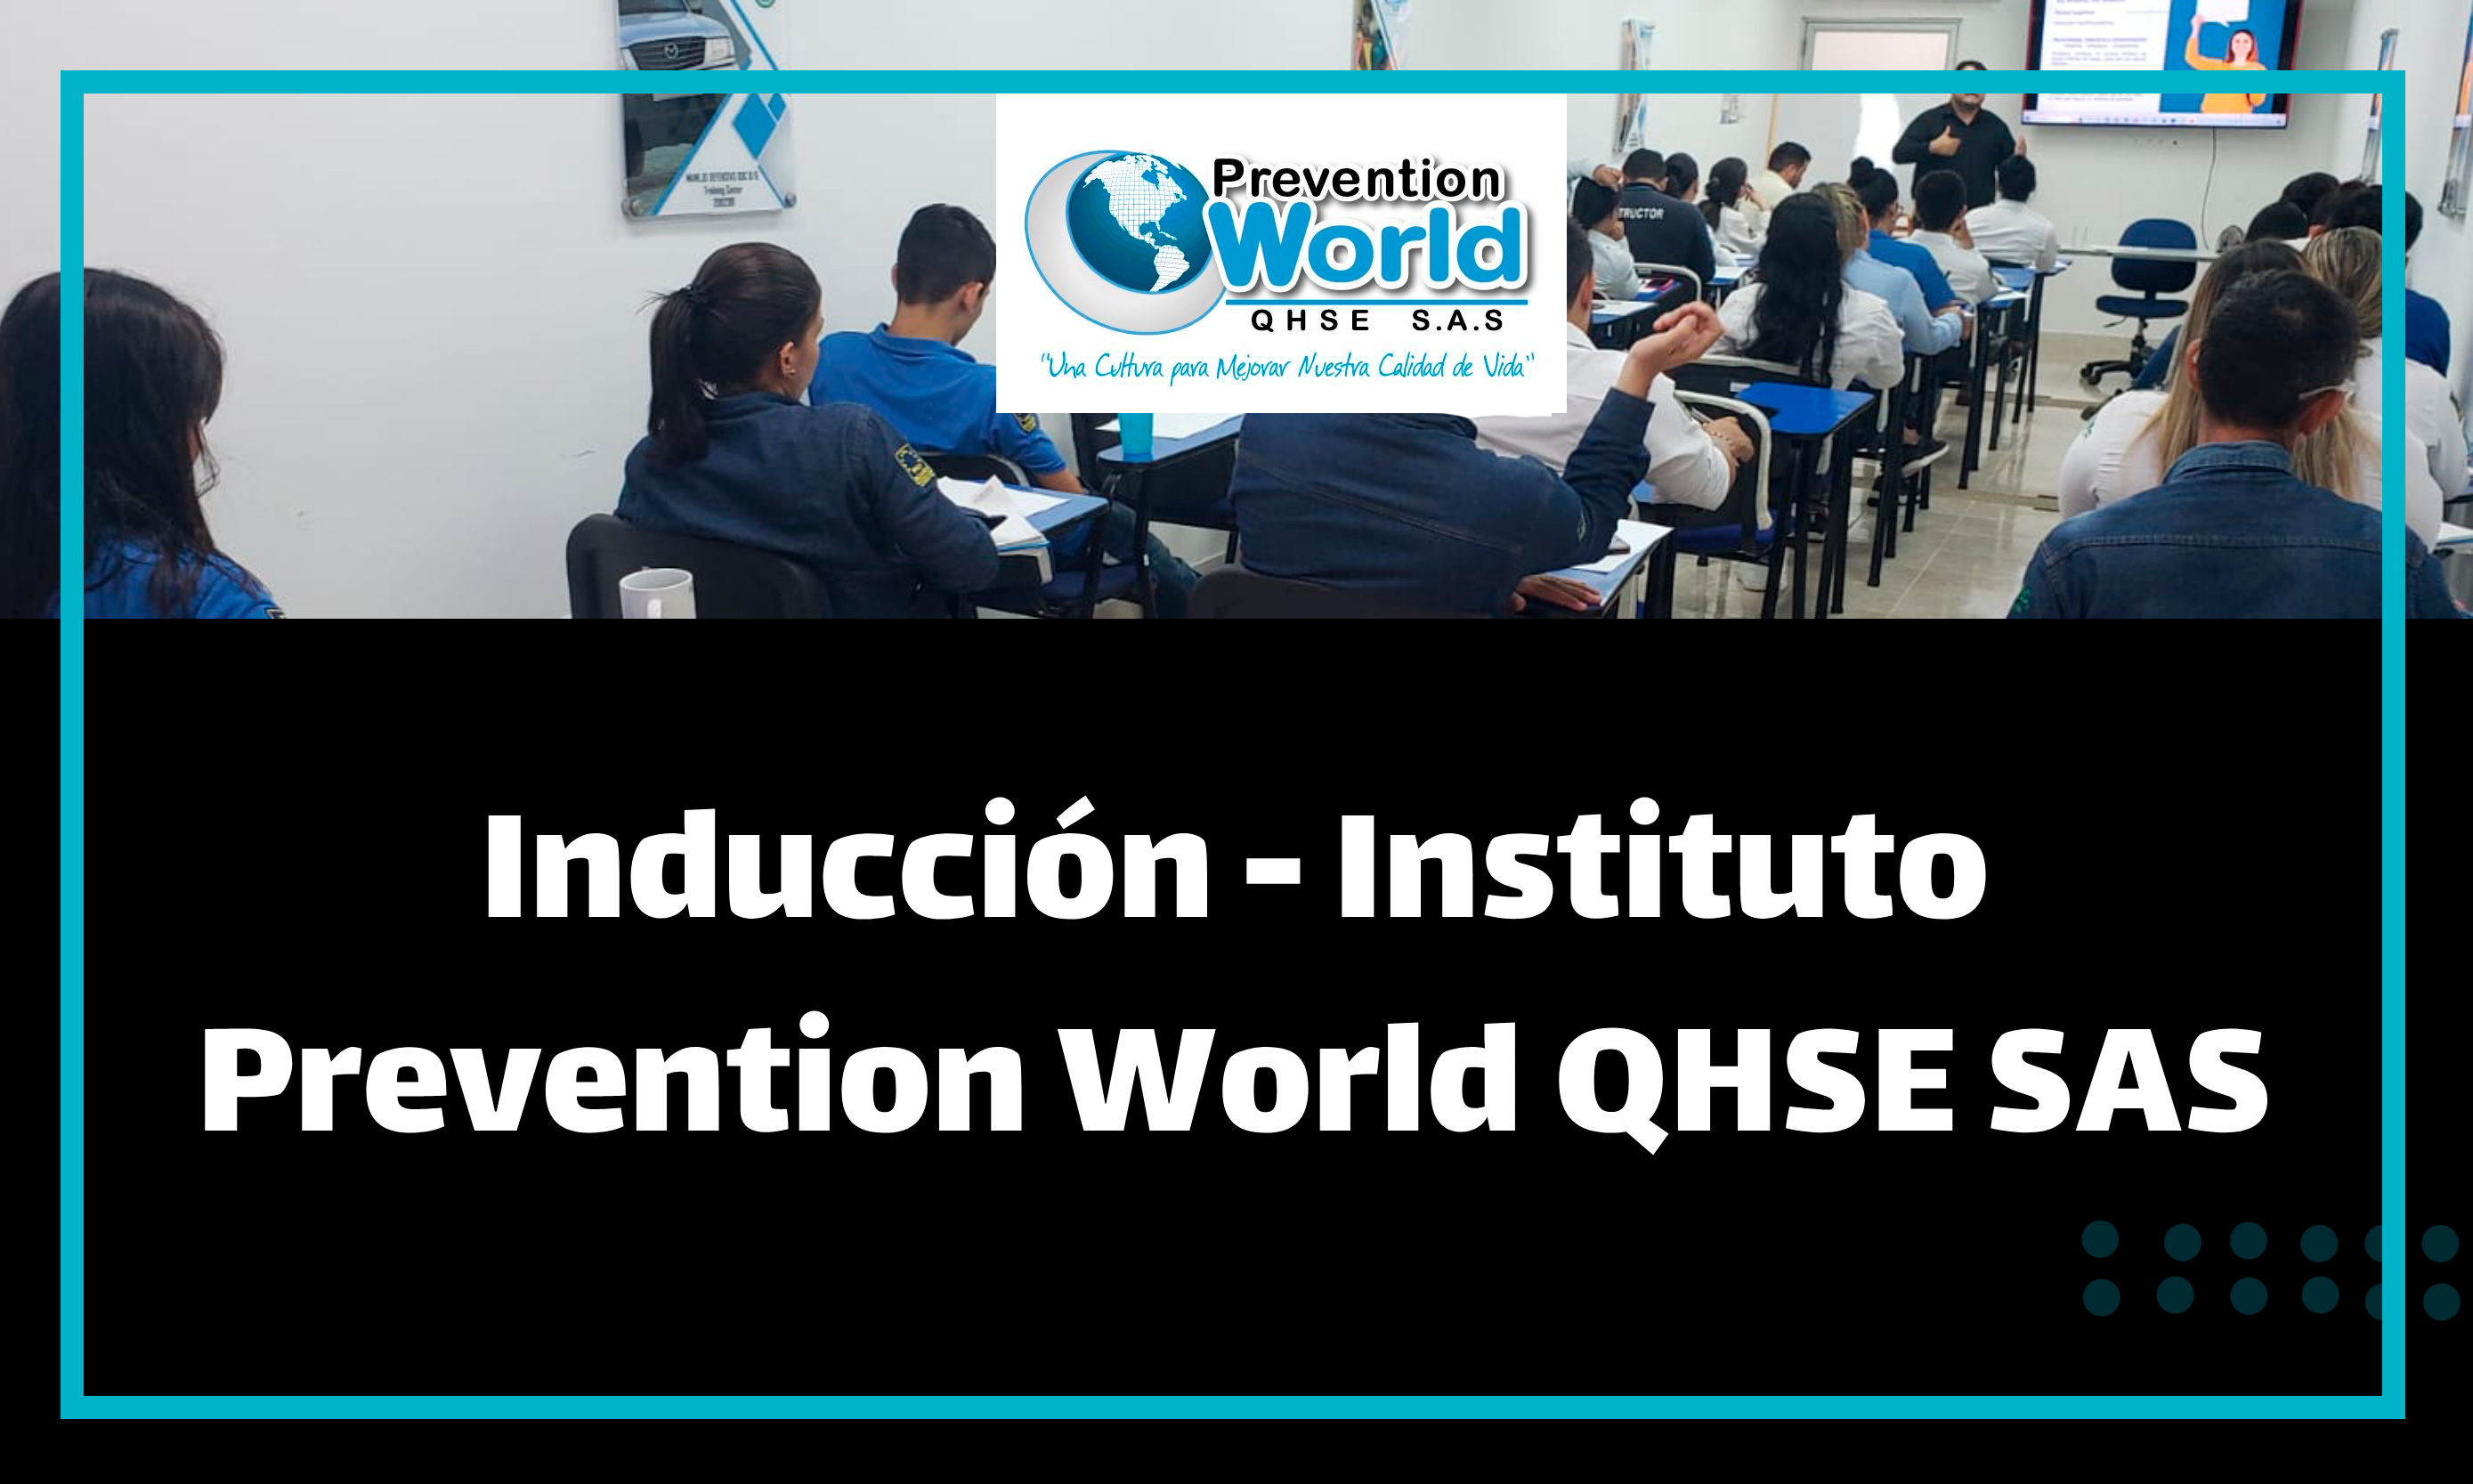 Inducción Instituto Prevention World QHSE S.A.S FREELANCE 